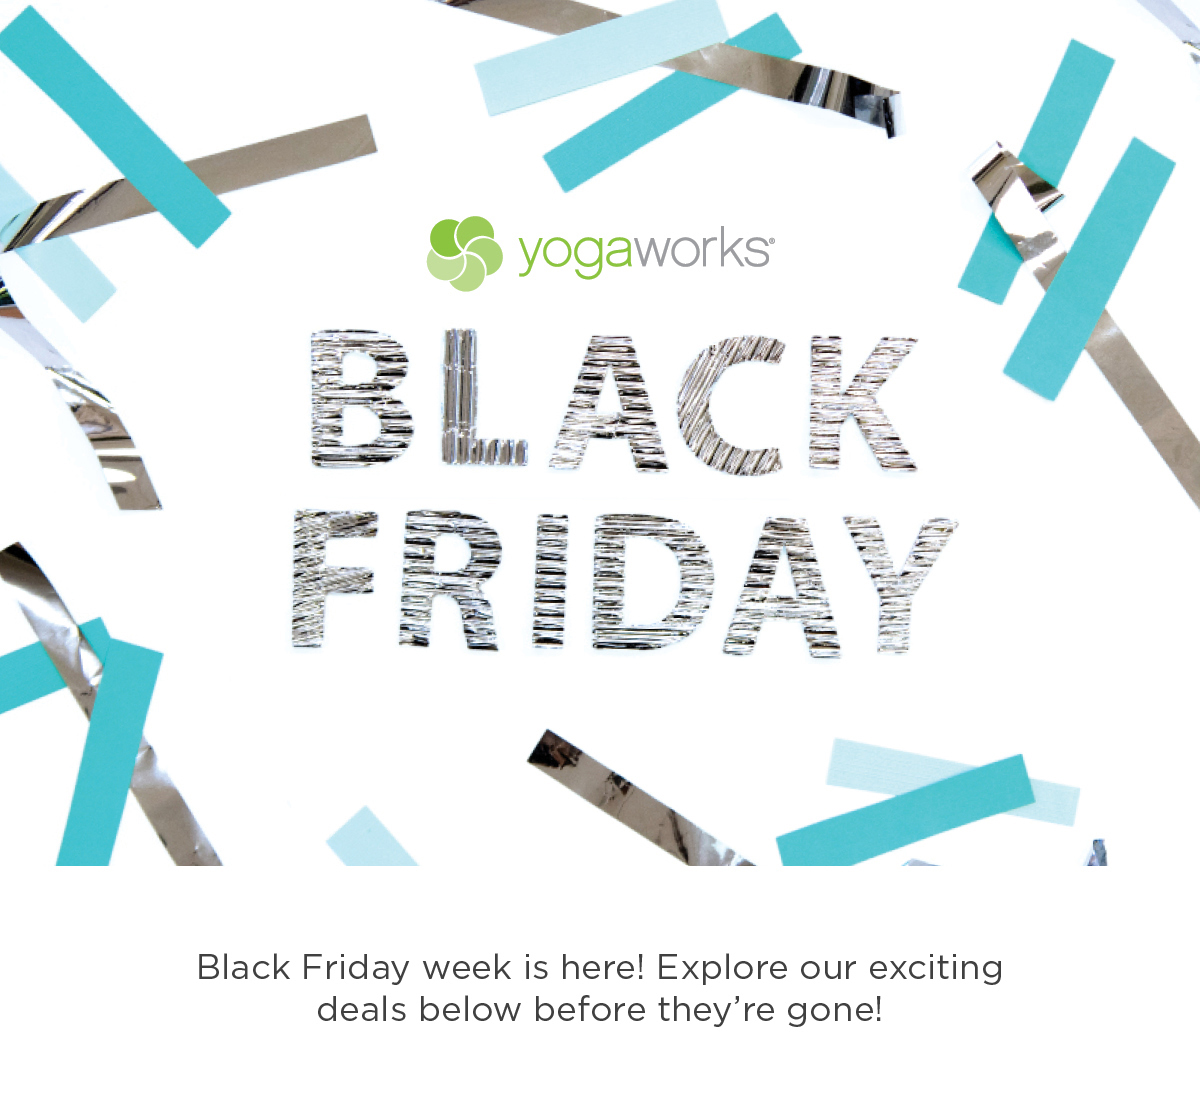 Black Friday is here - explore our exciting deals before they are gone!